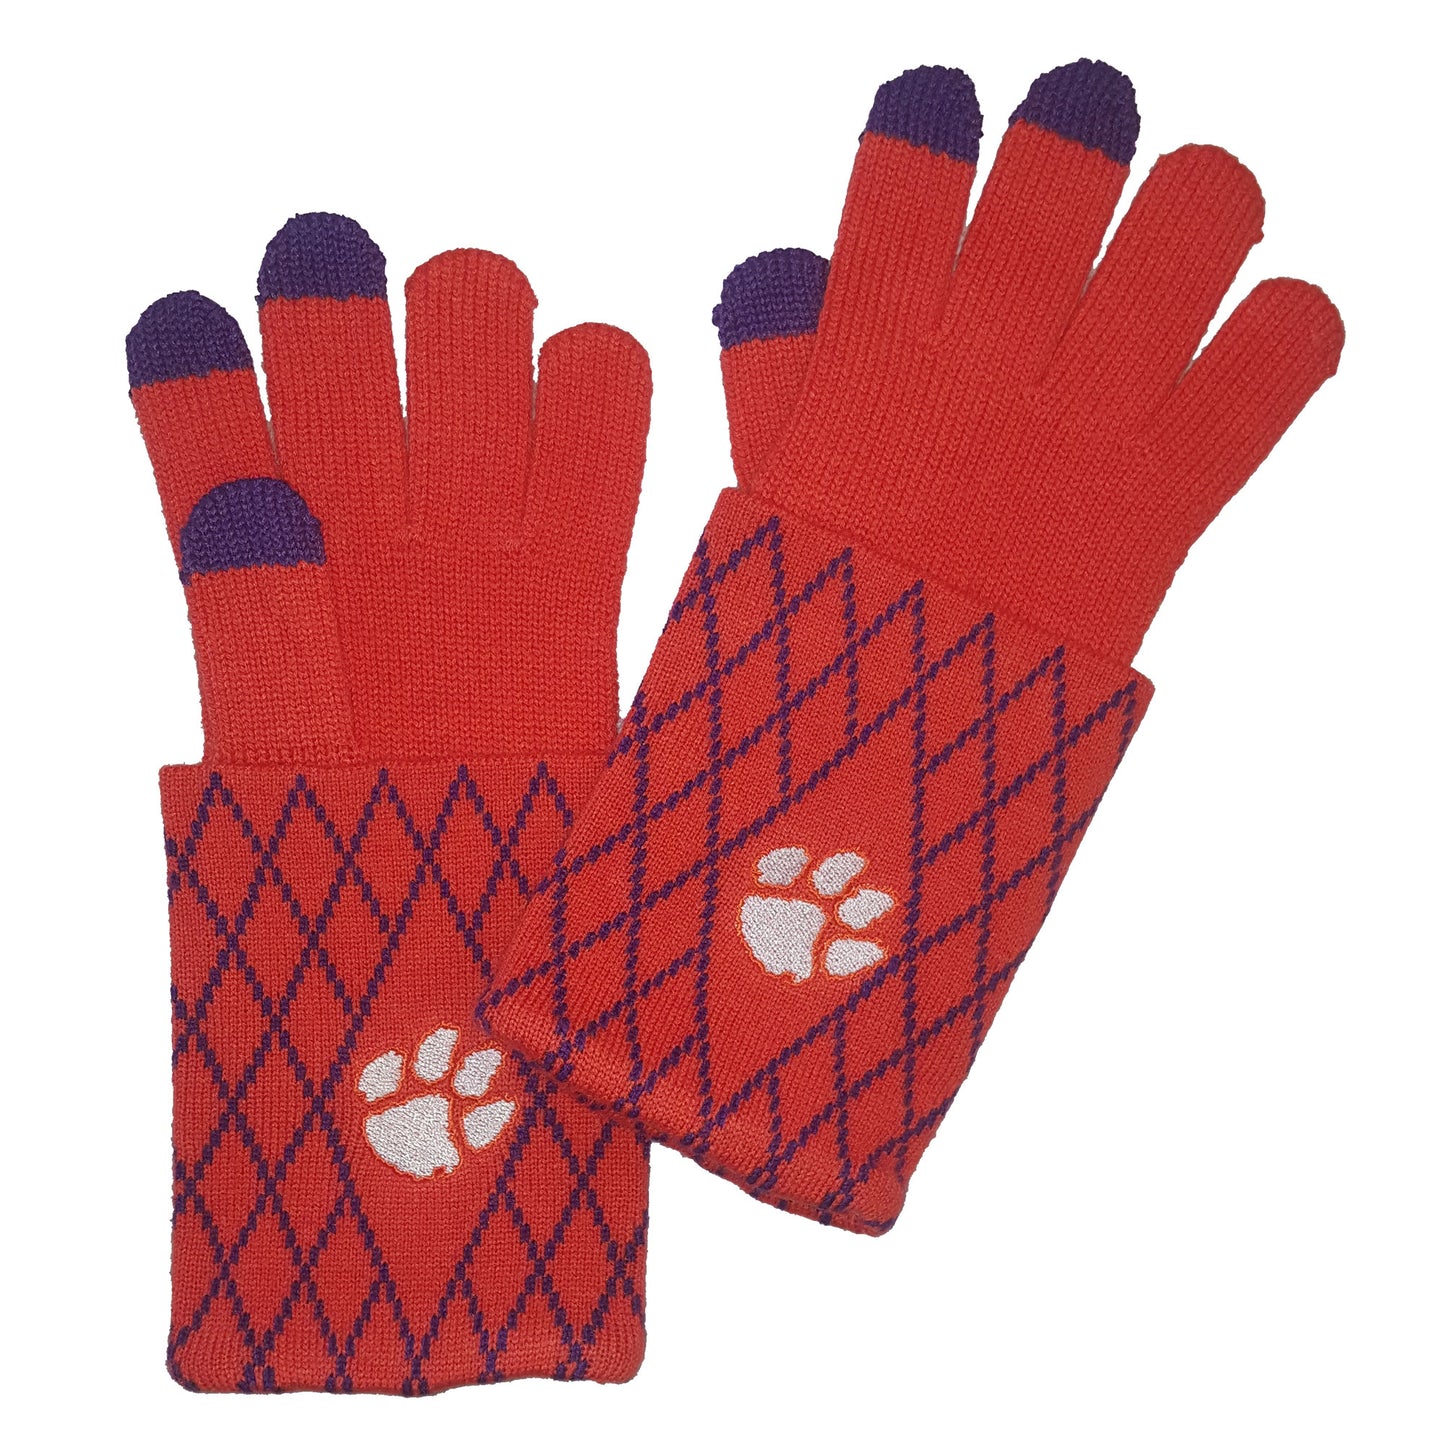 Clemson Tigers Knit Gloves With Tech Fingertips